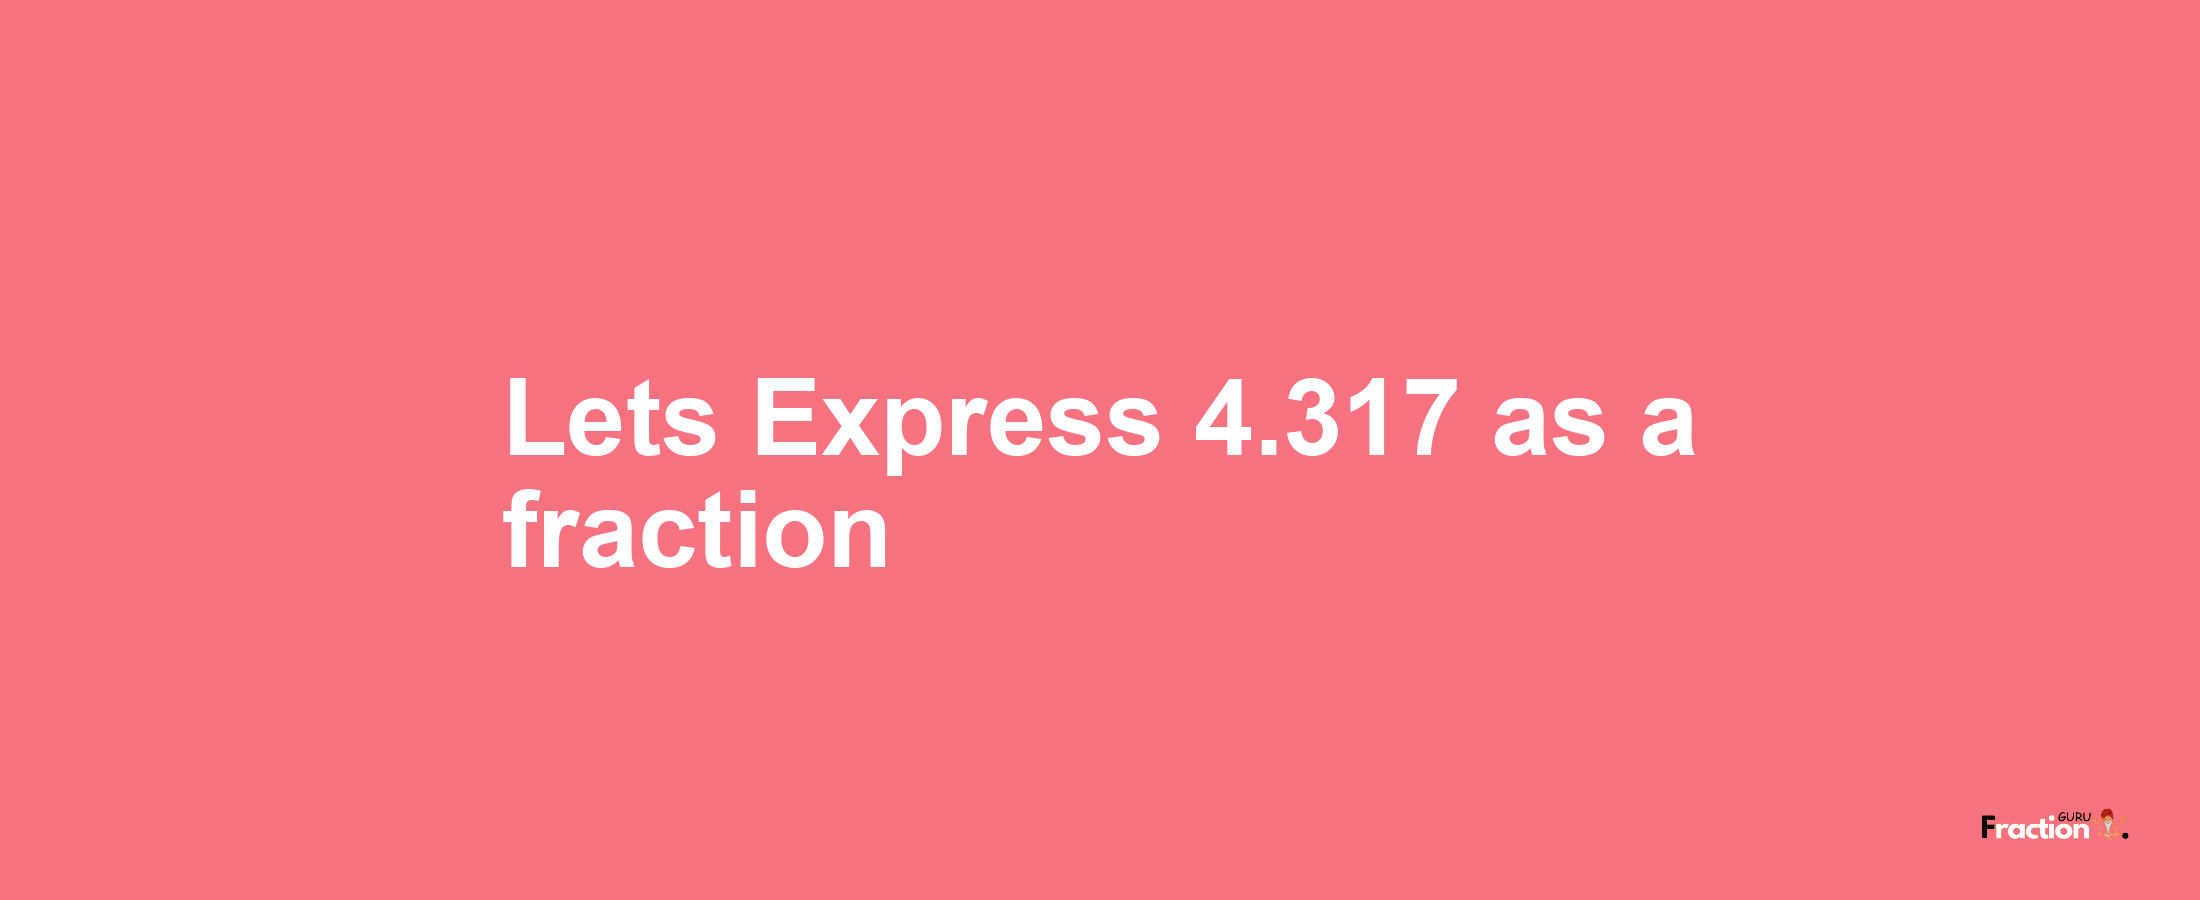 Lets Express 4.317 as afraction